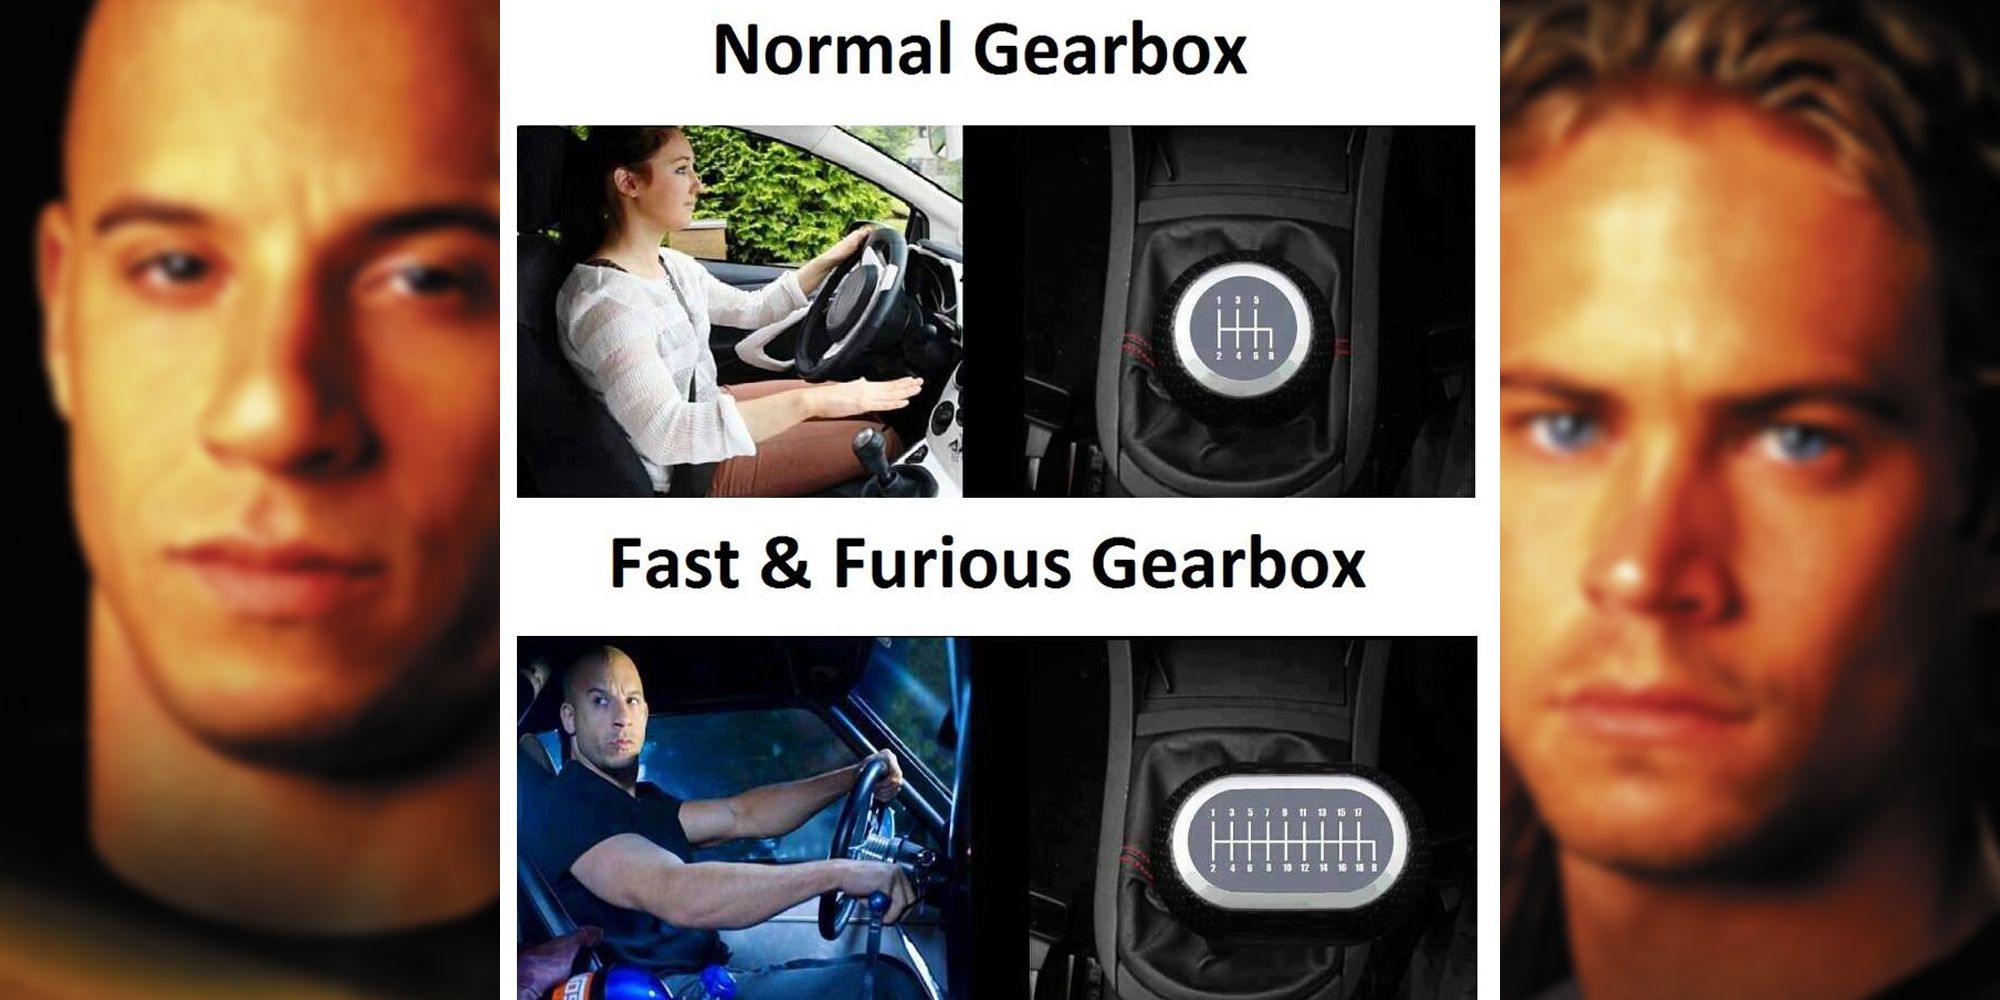 Fast and Furious gearbox meme.